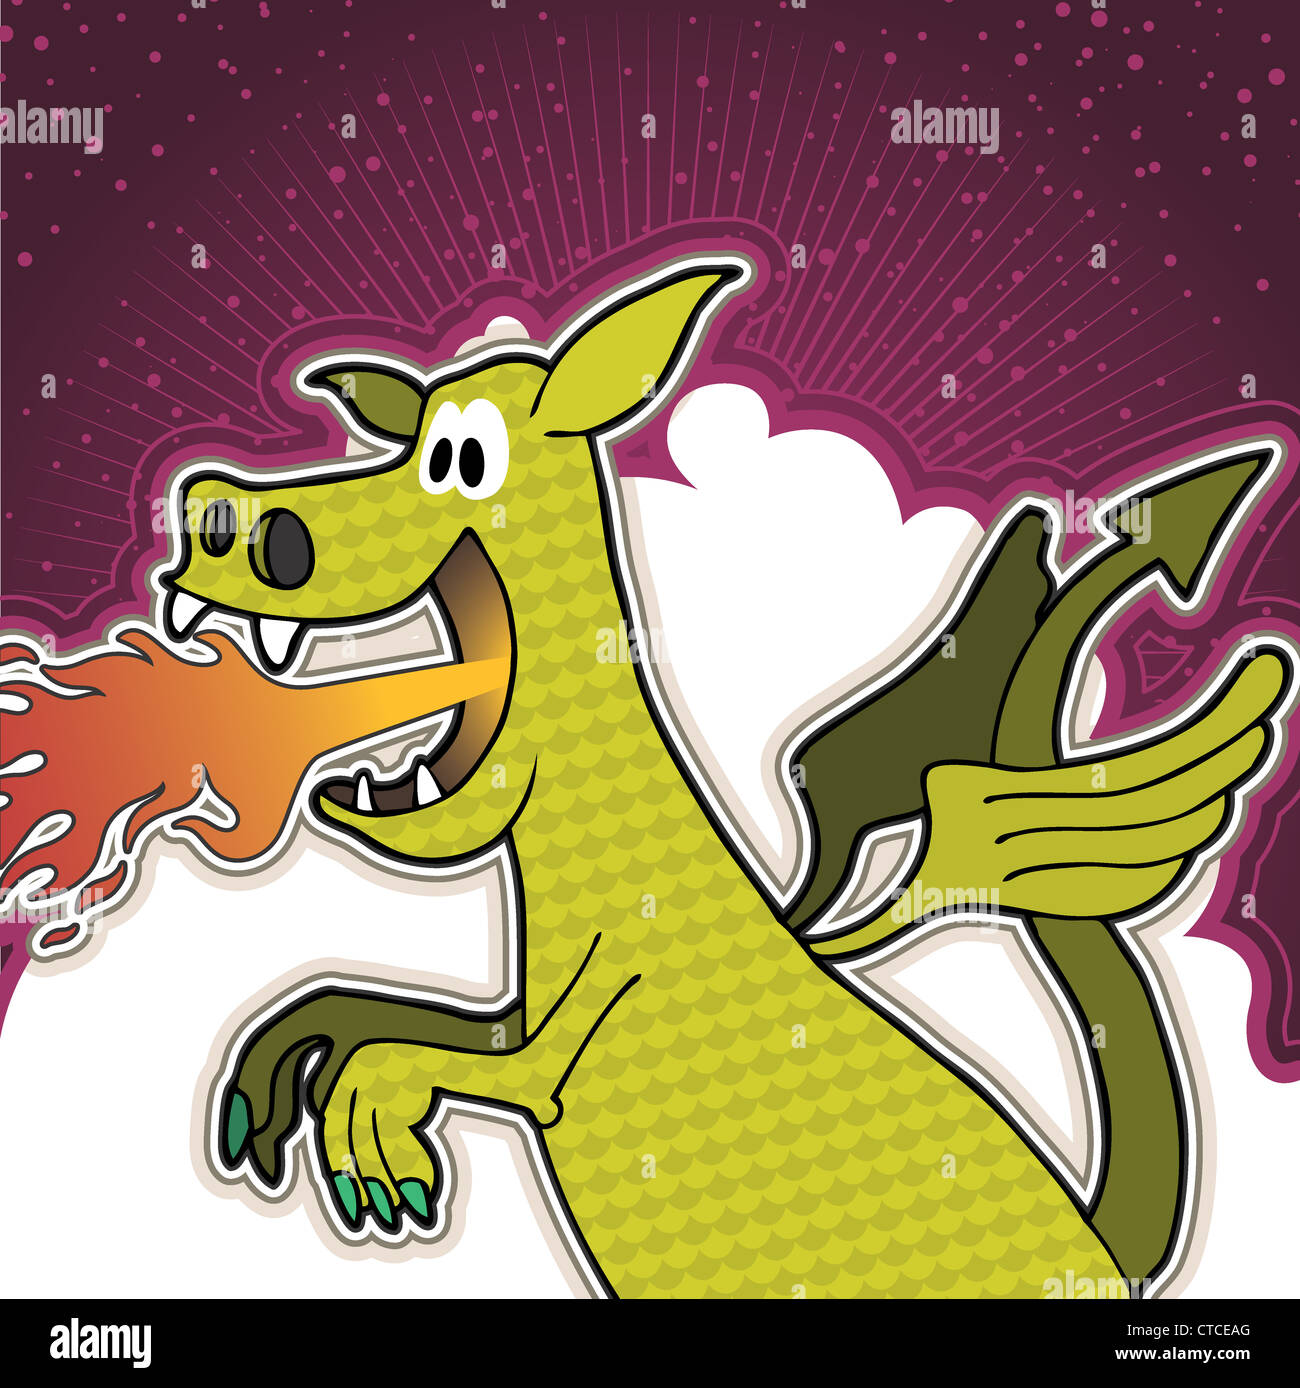 Illustrated funny dragon background Stock Photo